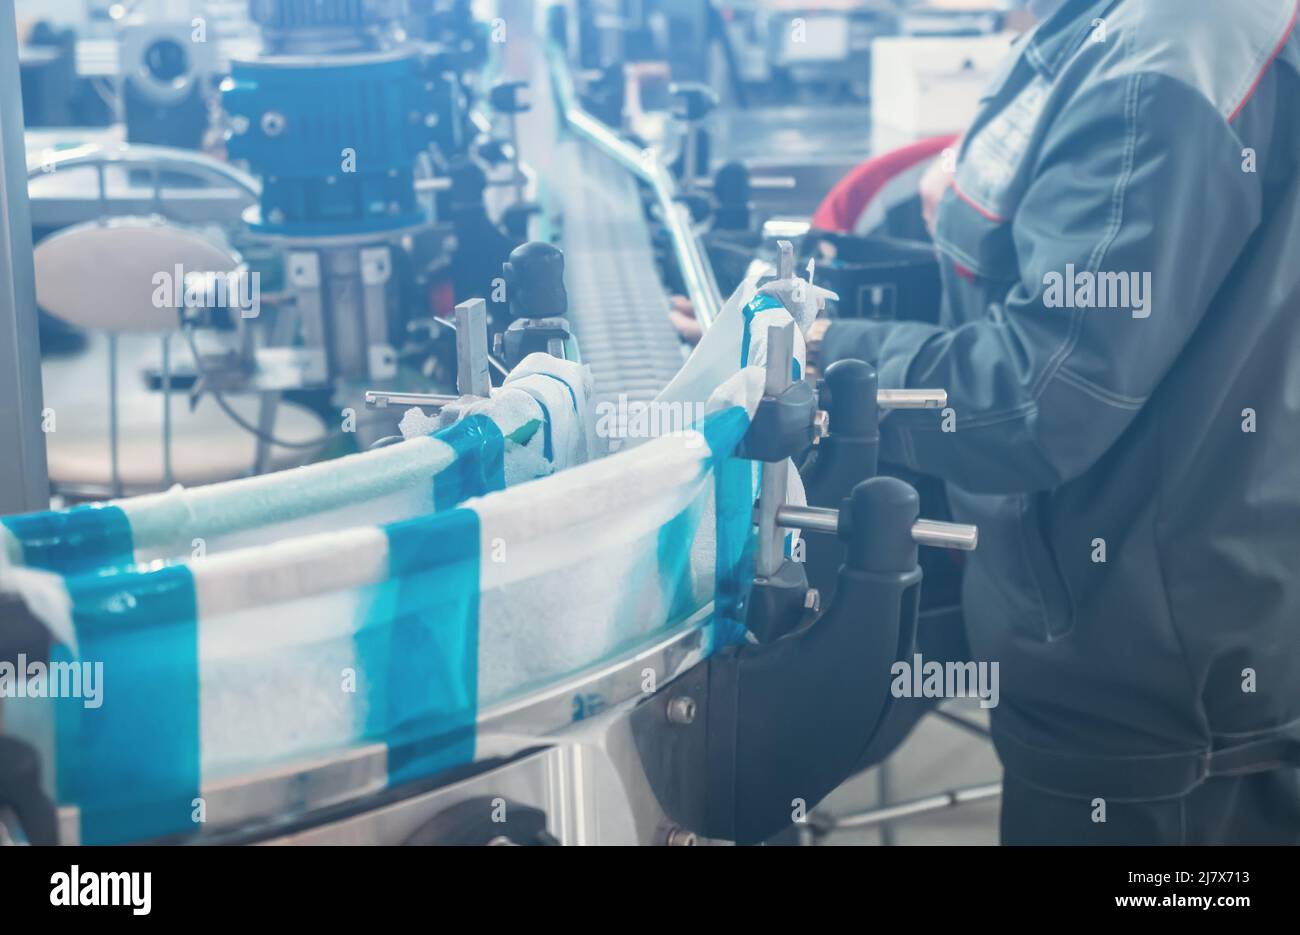 Conveyor line or production line in wine or beverage factory close up. Stock Photo